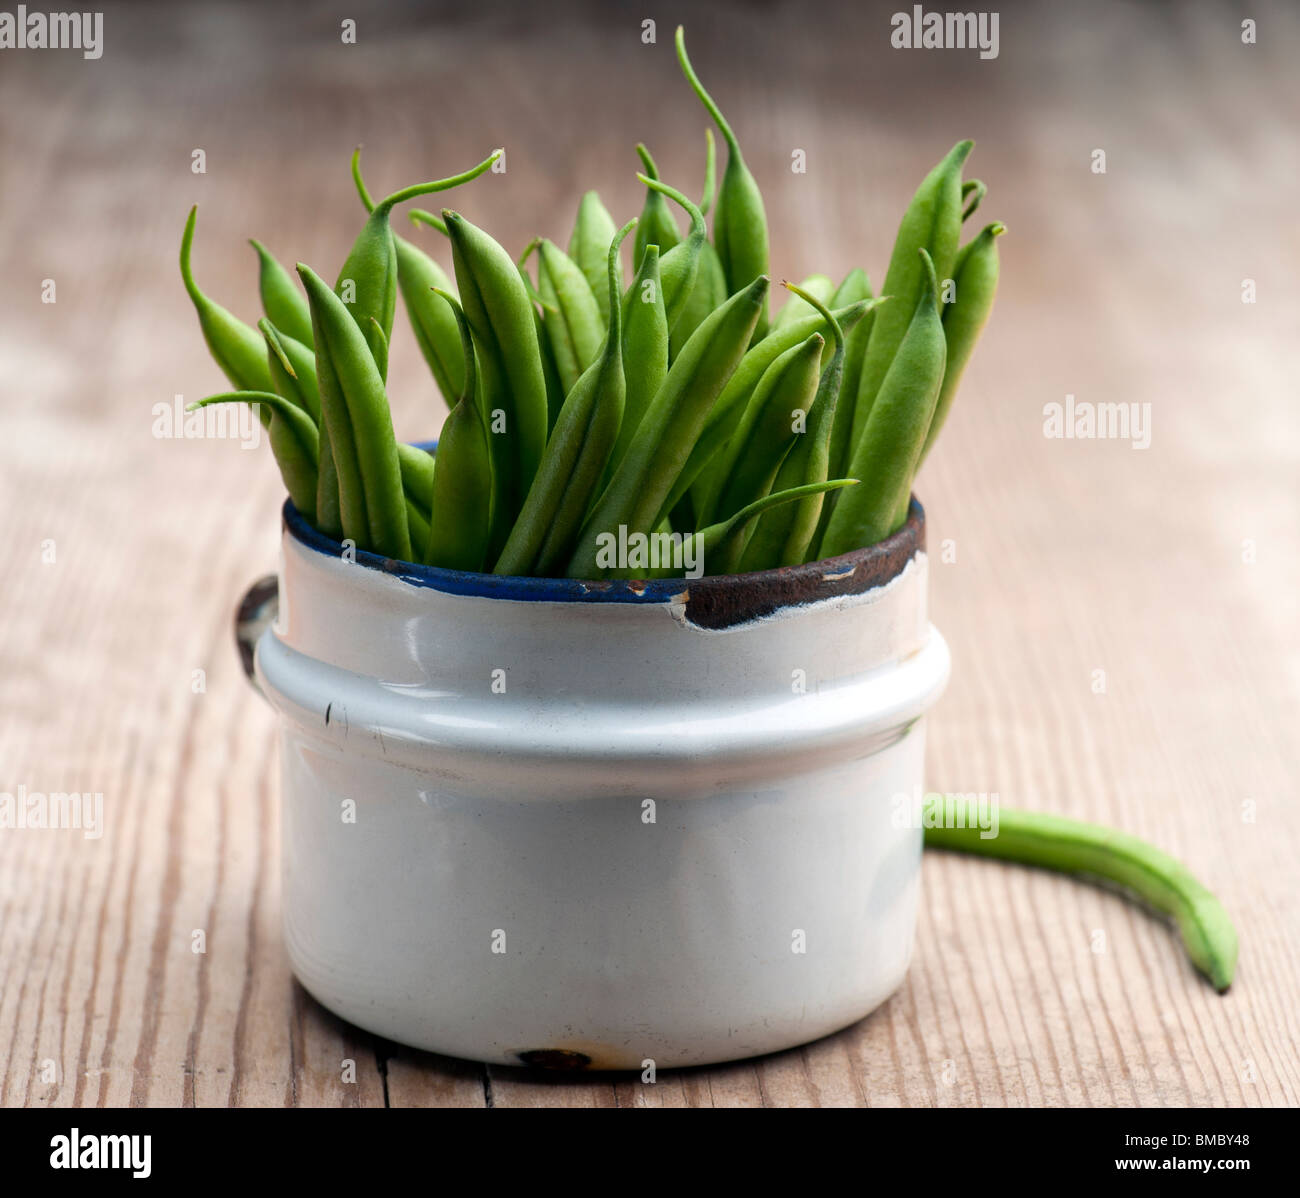 Freshly Picked Green Beans In An Old Enamel Mug On A Wooden Surface Stock Photo